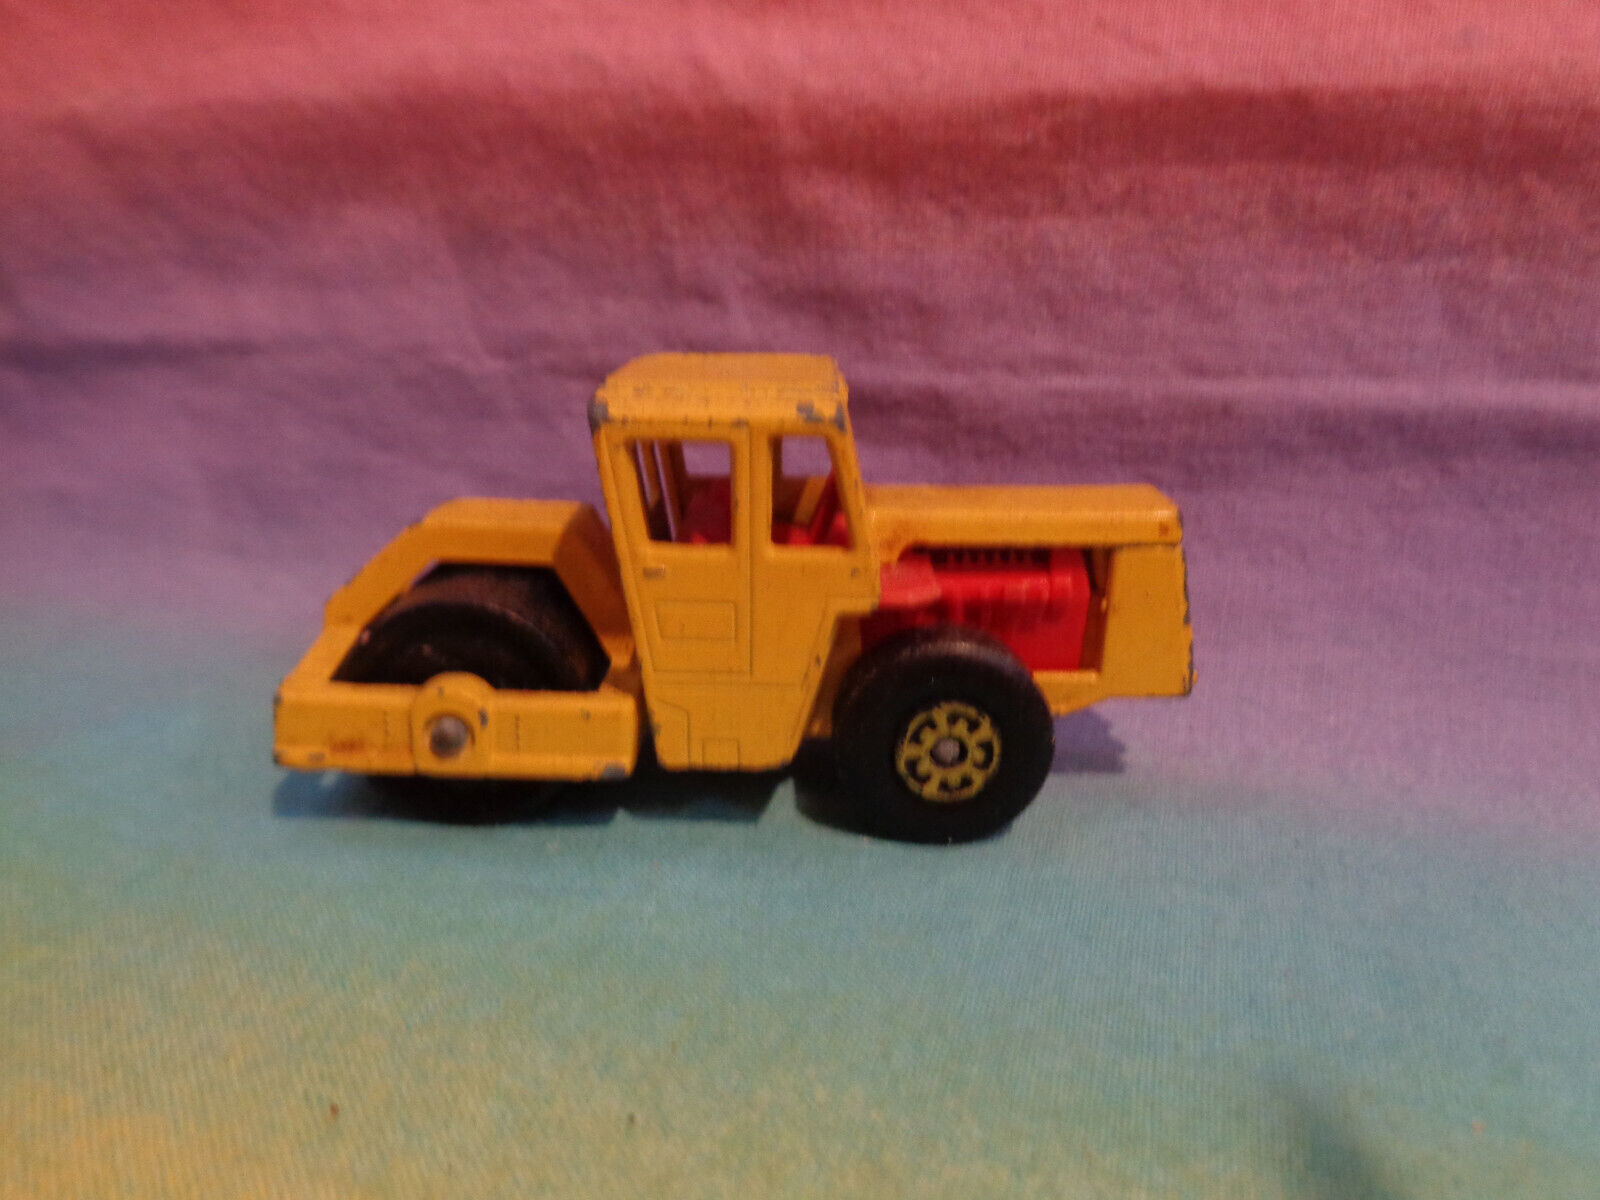 Vintage 1978 Lesney Matchbox SuperFast No 72 Bomag Road Roller Diecast Yellow - $3.95